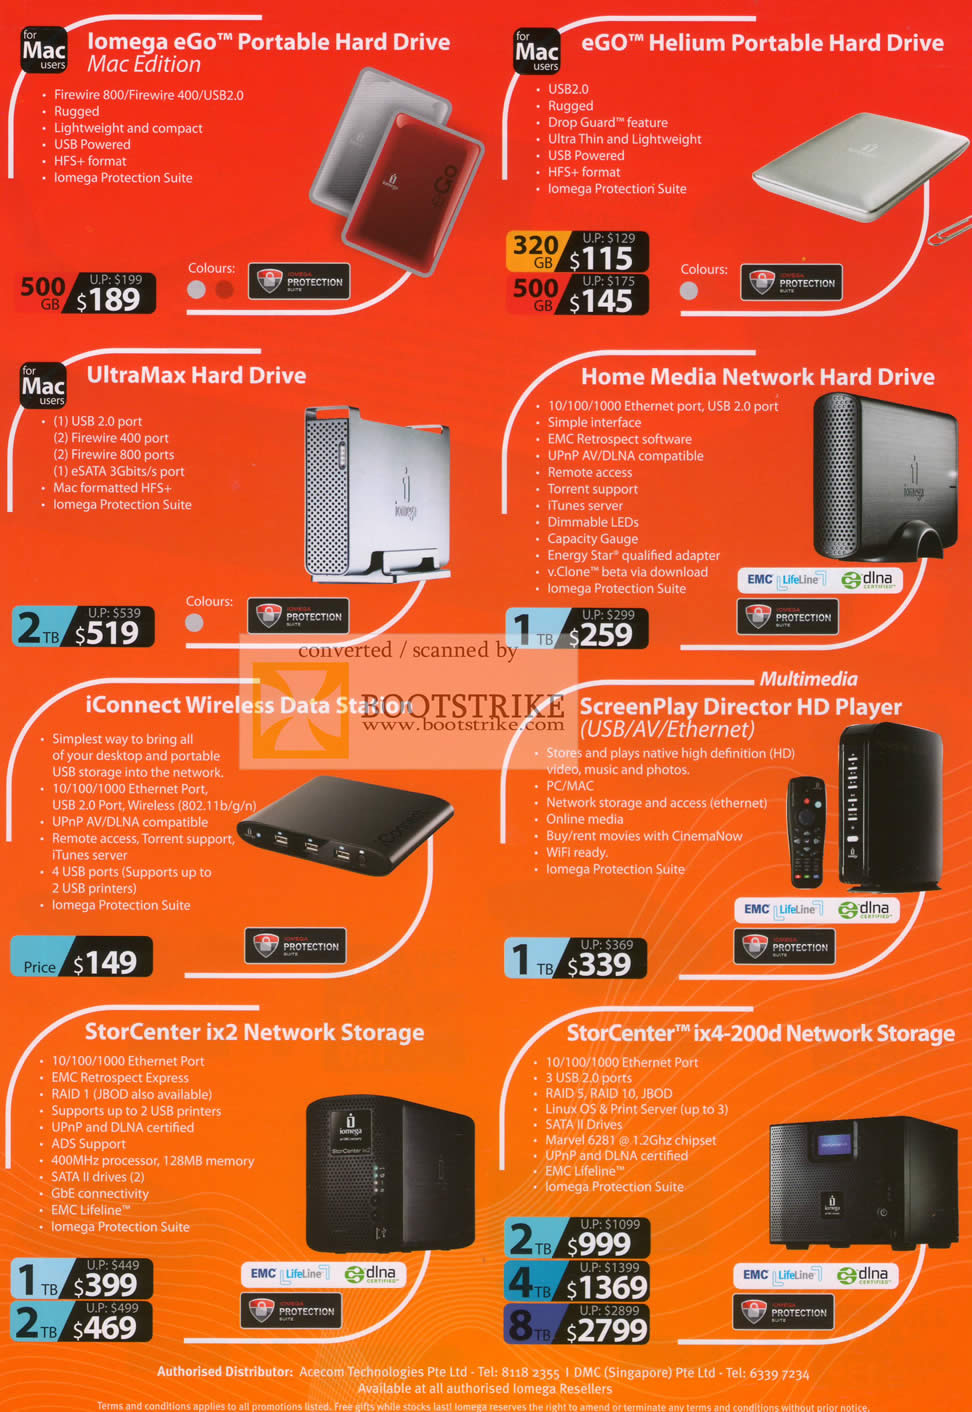 IT Show 2010 price list image brochure of Iomega EGo Portable External Storage Helium UltraMax NAS IConnect ScreenPlan Director StorCenter Media Player